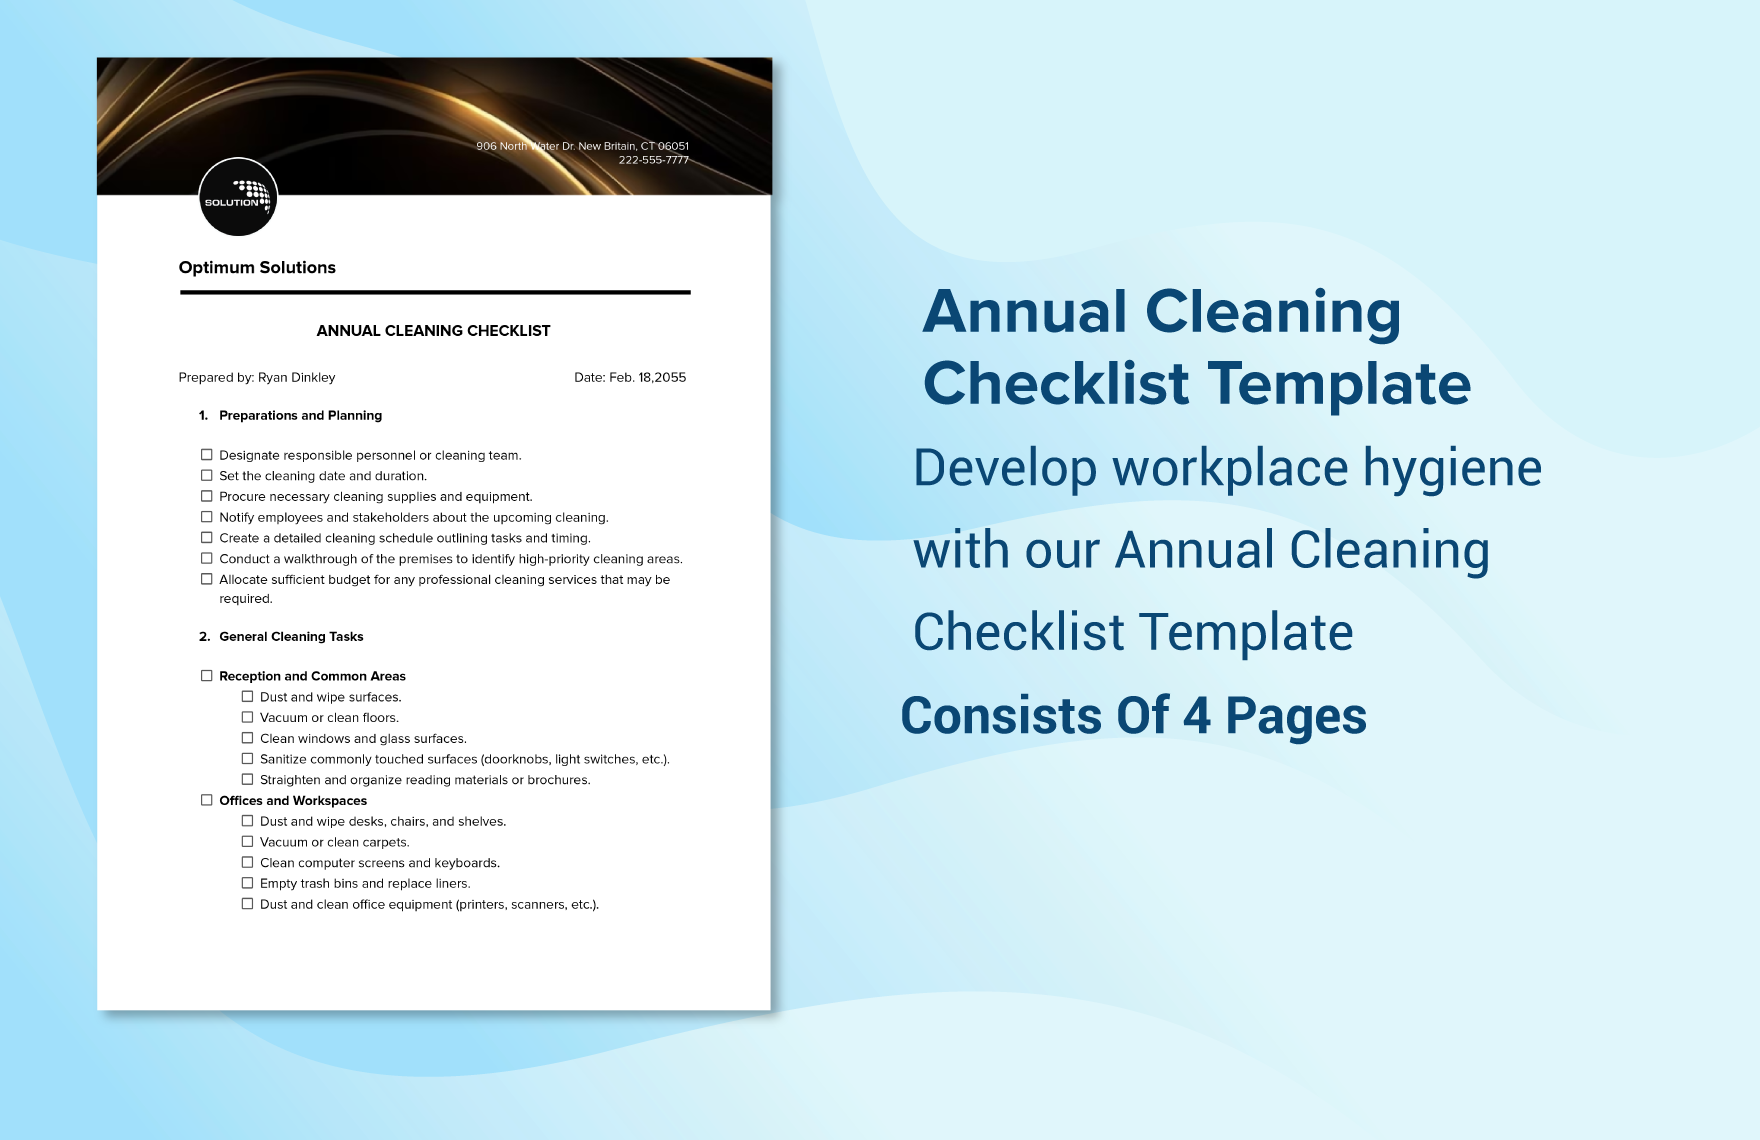 Annual Cleaning Checklist Template